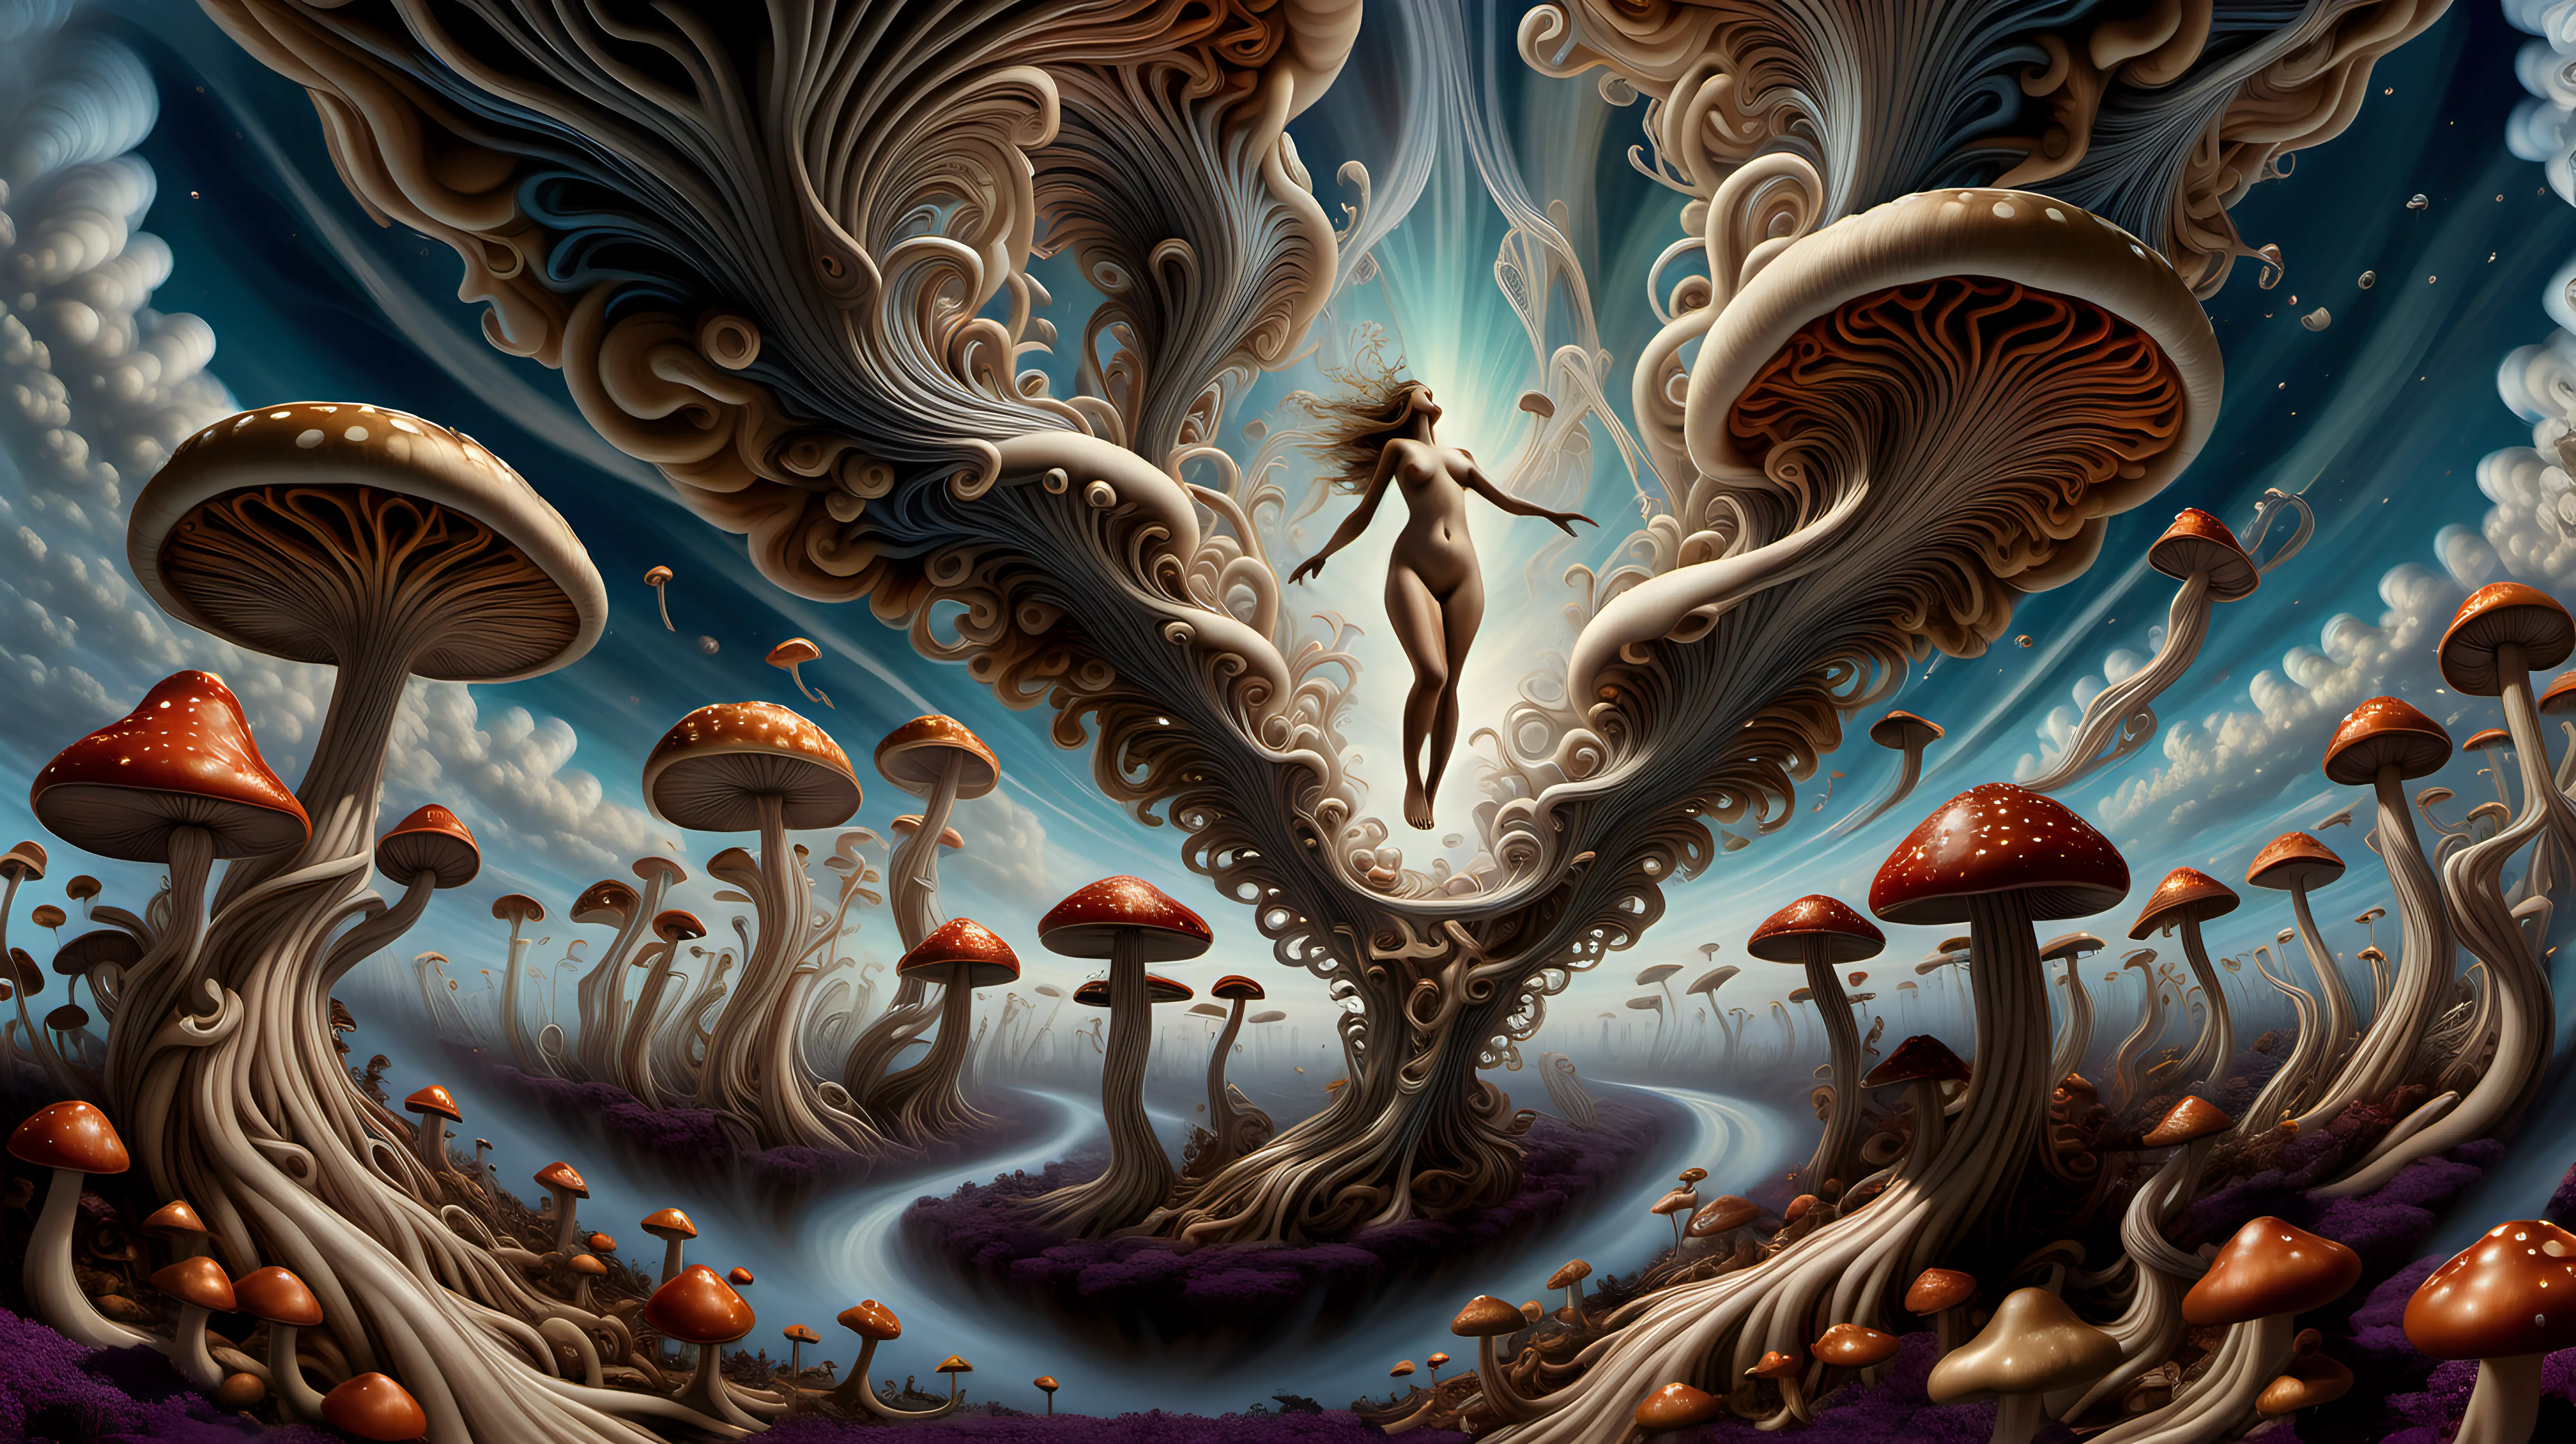 Psychedelic fractal sky with swirling fluid , a variety of different kinds of mushrooms twisting and extending from the ground up to the sky on right and left, nude female figure flying up in center facing the sky, hyper realistic, moody, ascending and euphoric